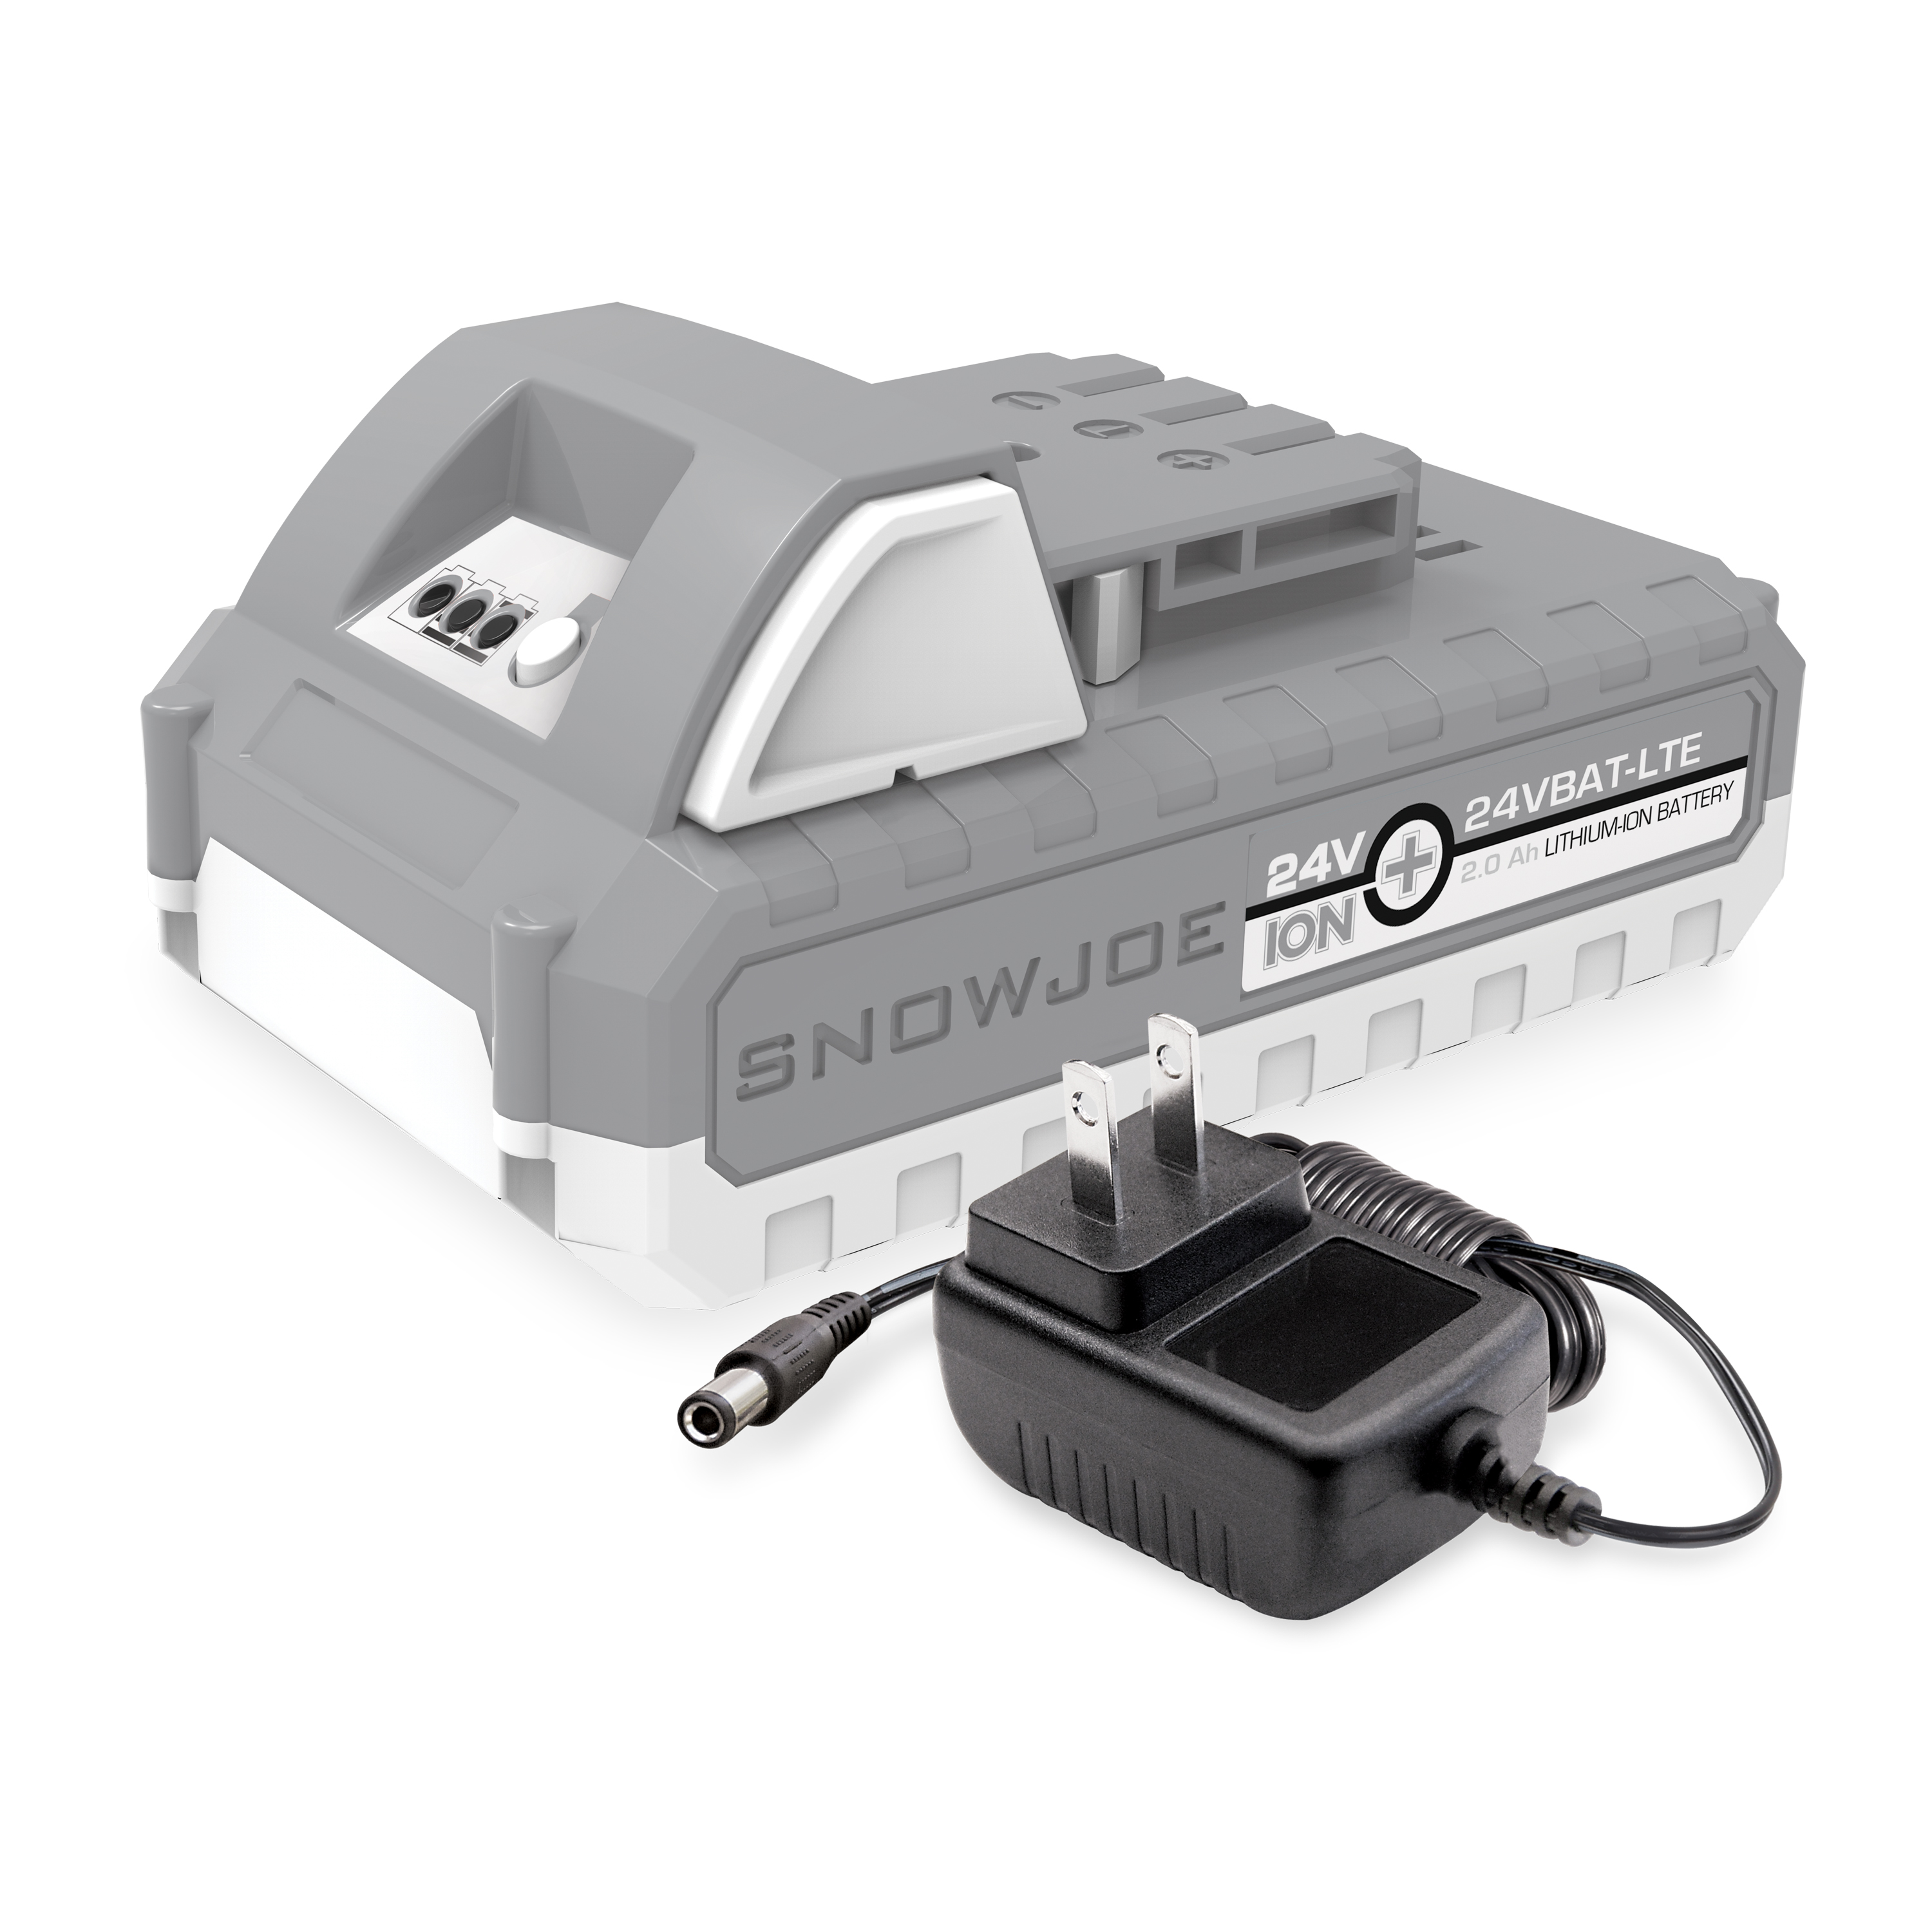 24-Volt iON+ Starter Kit w/ Lithium iON Battery + Charger